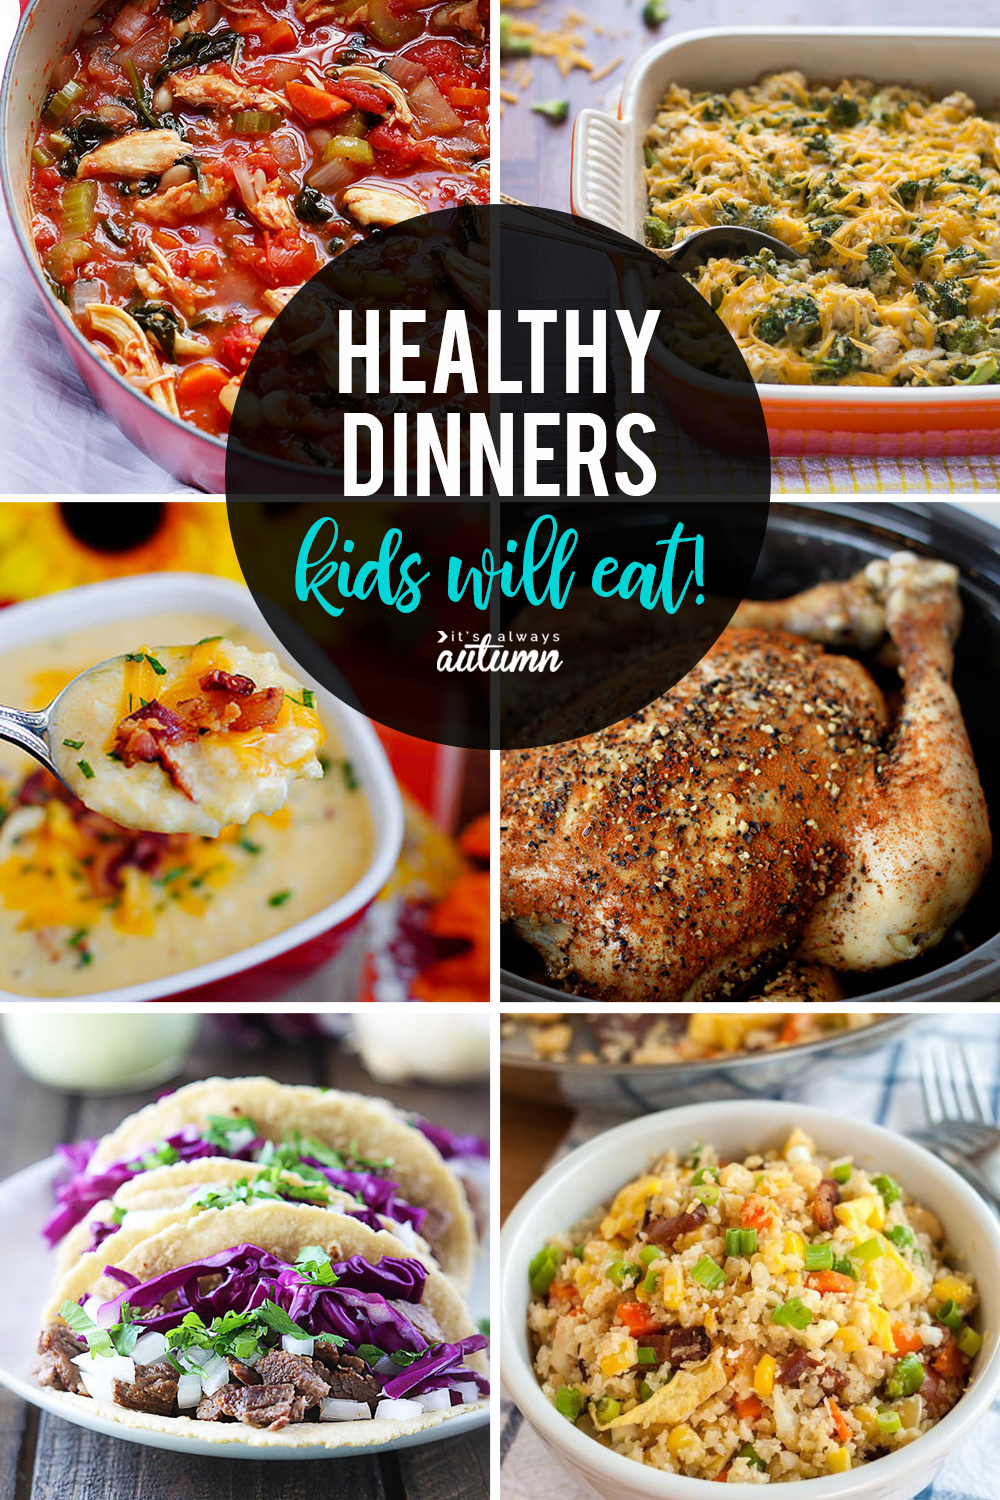 Our 50 Mostpopular Healthy Recipes Healthy Meals Foods